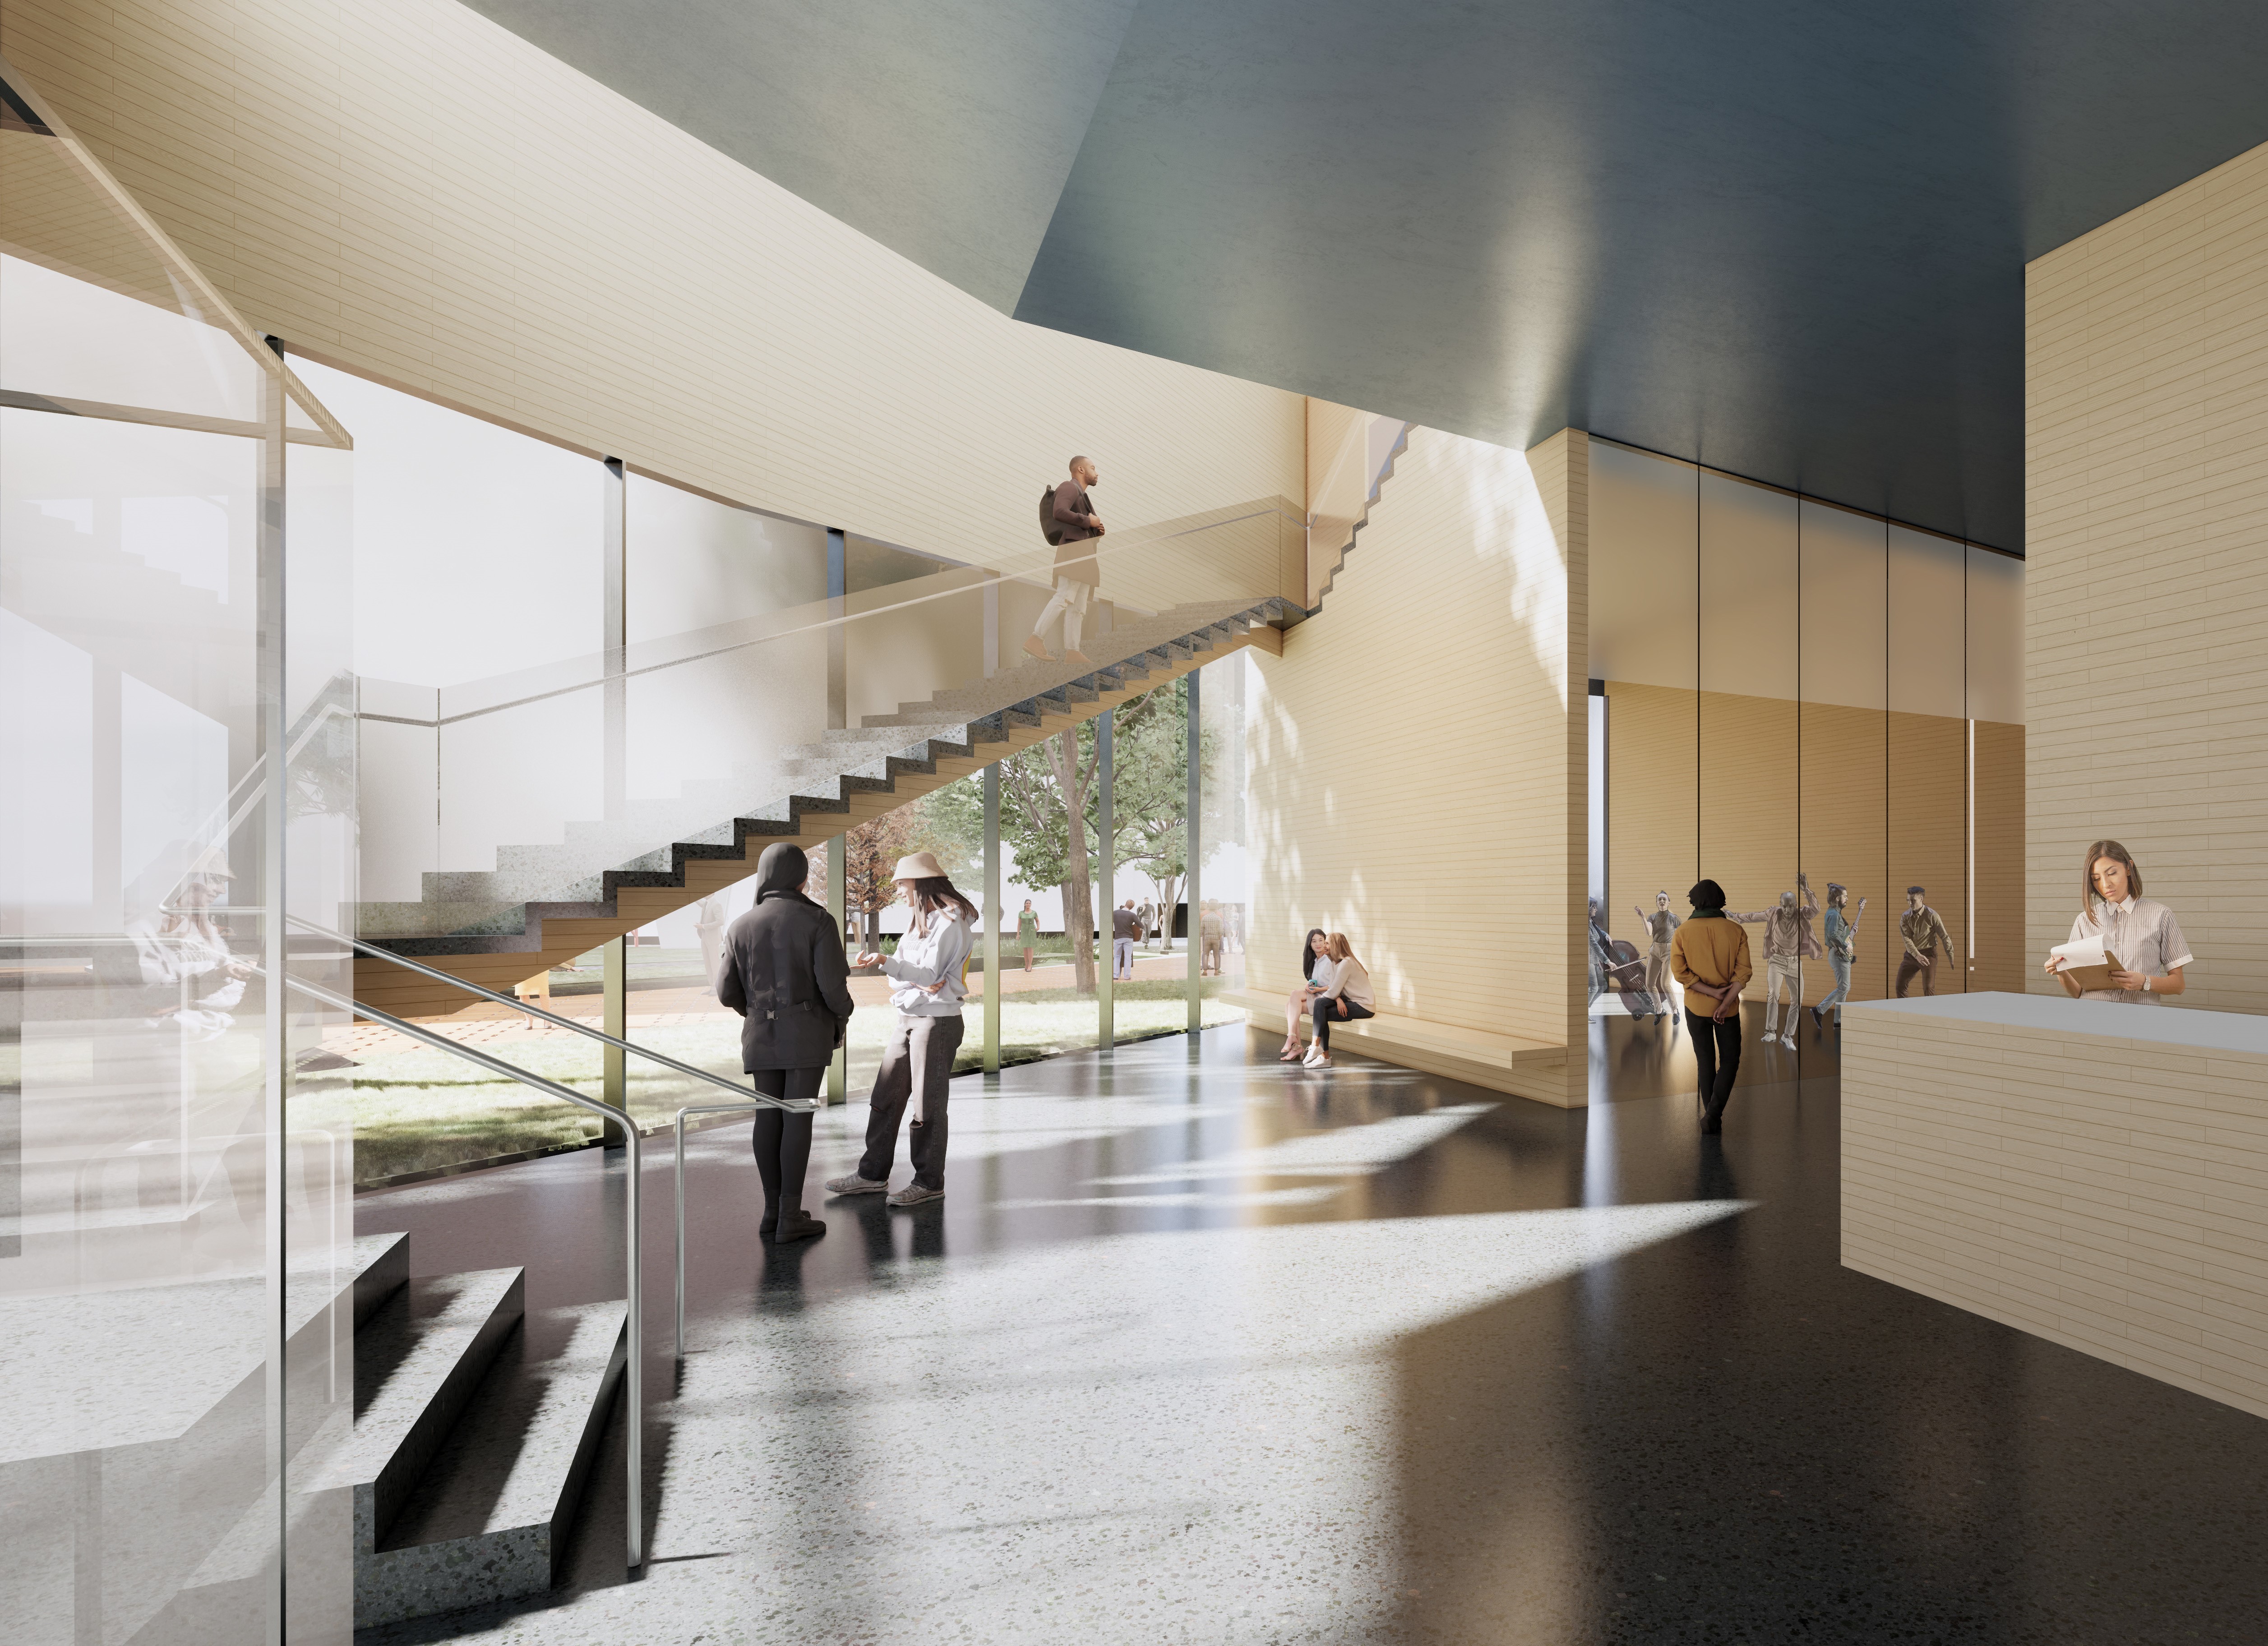 Architects rending of the lobby of the new Student Performing Arts Center at the University of Pennsylvania.